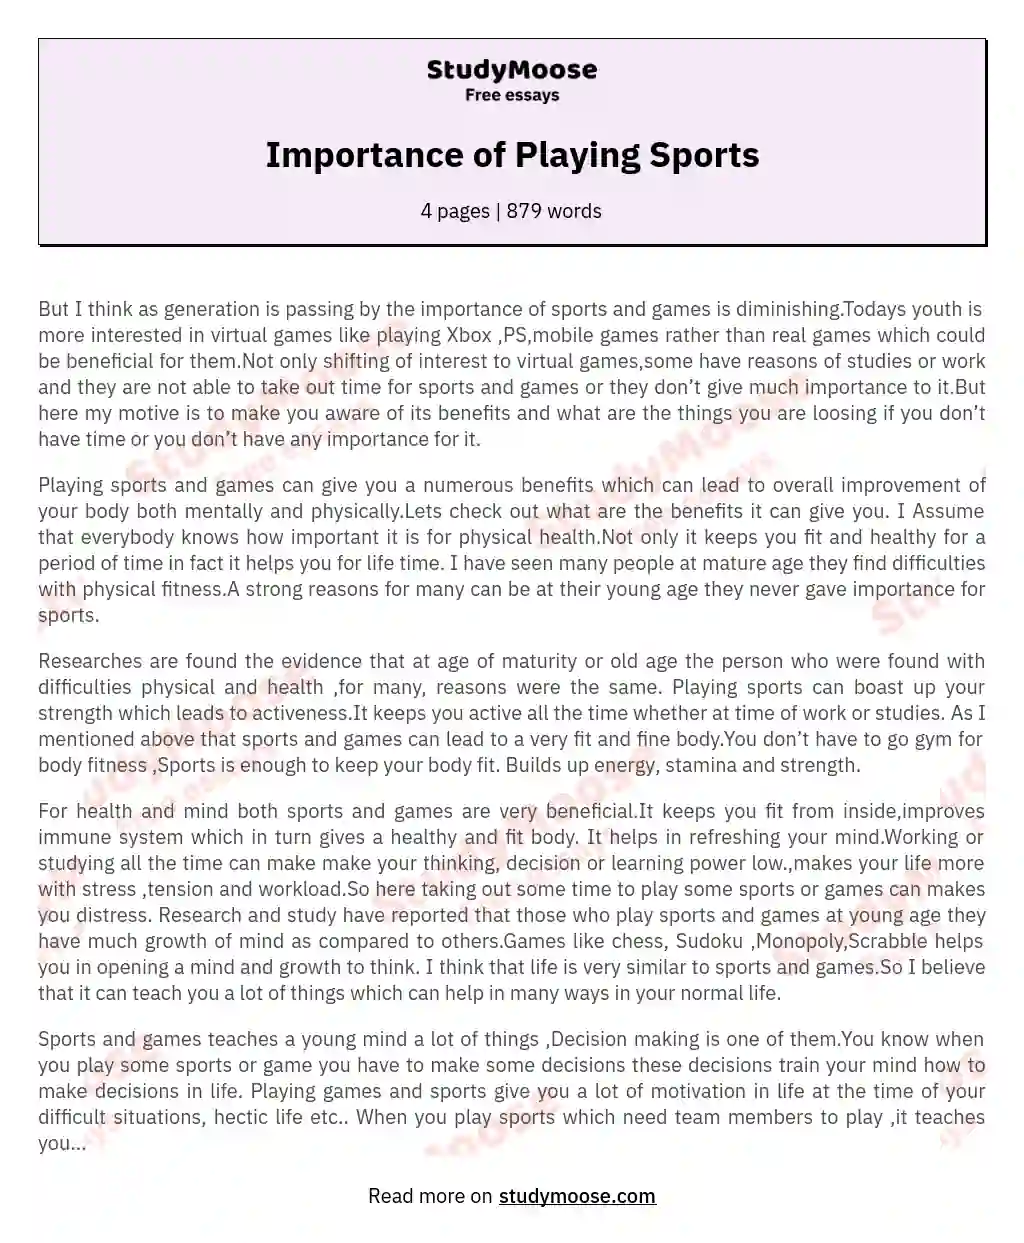 Importance of Playing Sports essay